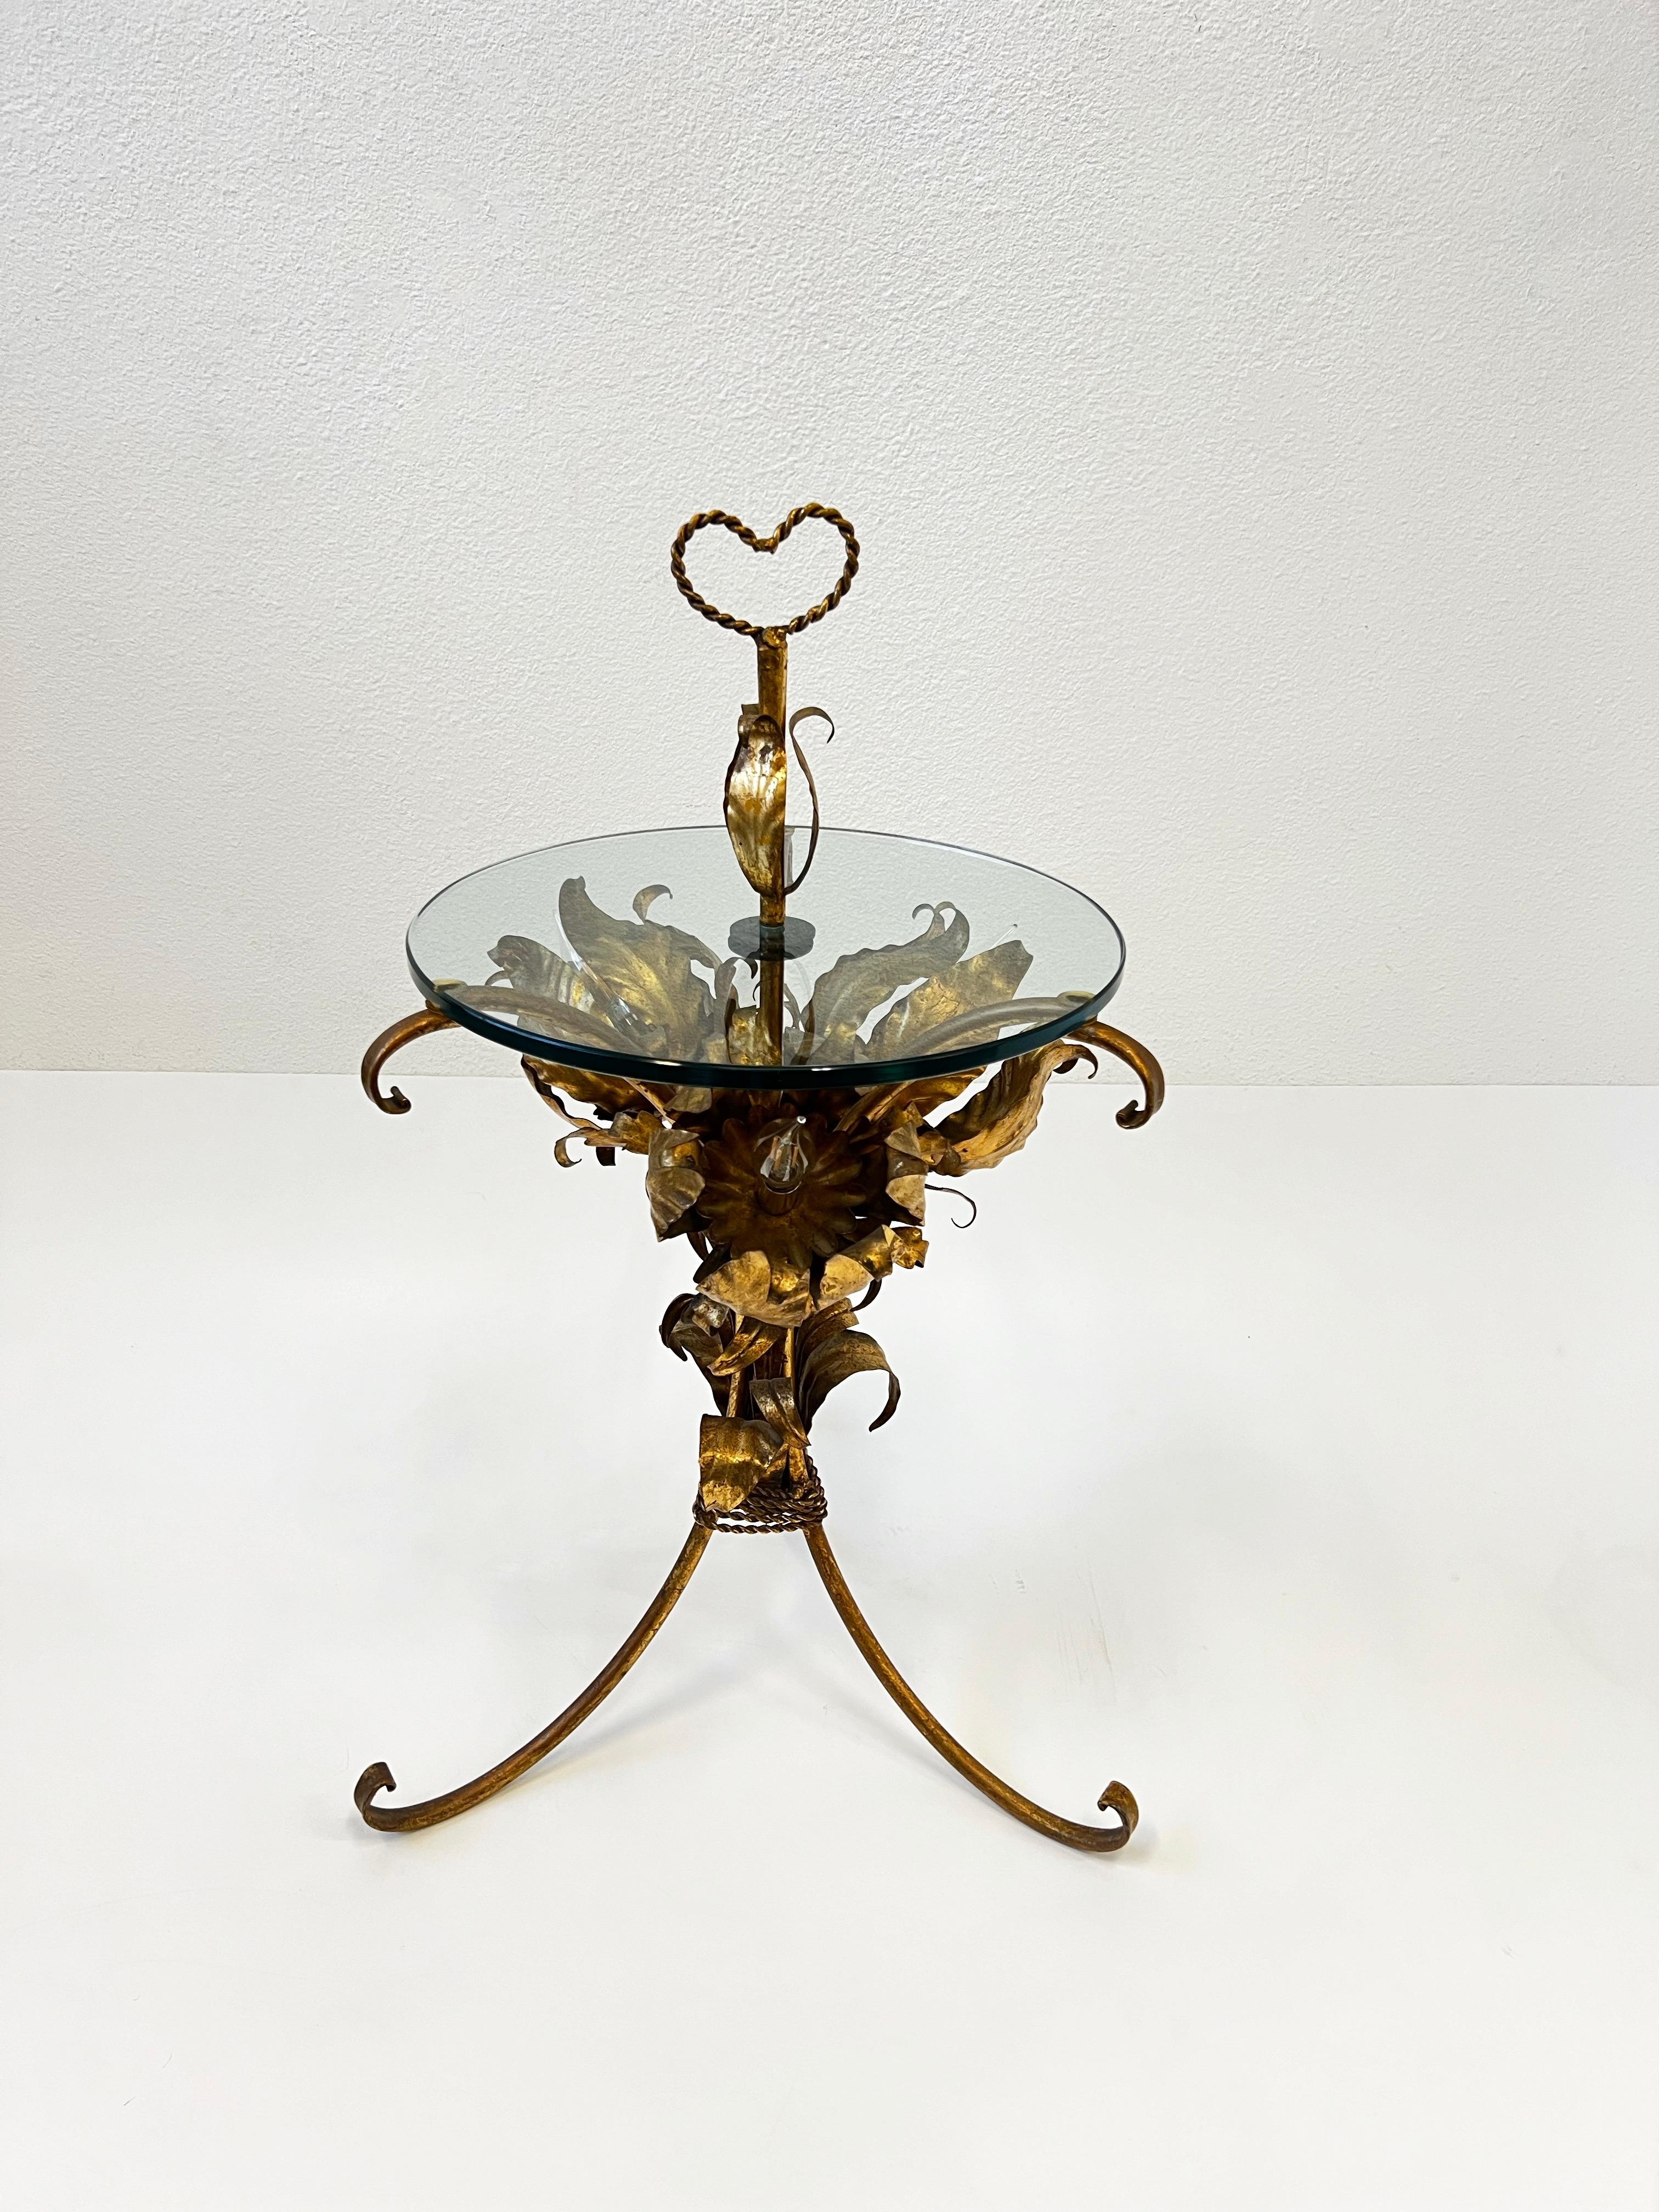 1970 Italian Gilded flower light side table by Hans Kögl. 
The frame and glass are in original vintage condition. Retains Maid in Italy metal tag. Shows minor wear consistent with age. Newly rewired. 

Measurements: 21” Wide, 20.50” Deep, 23.25”